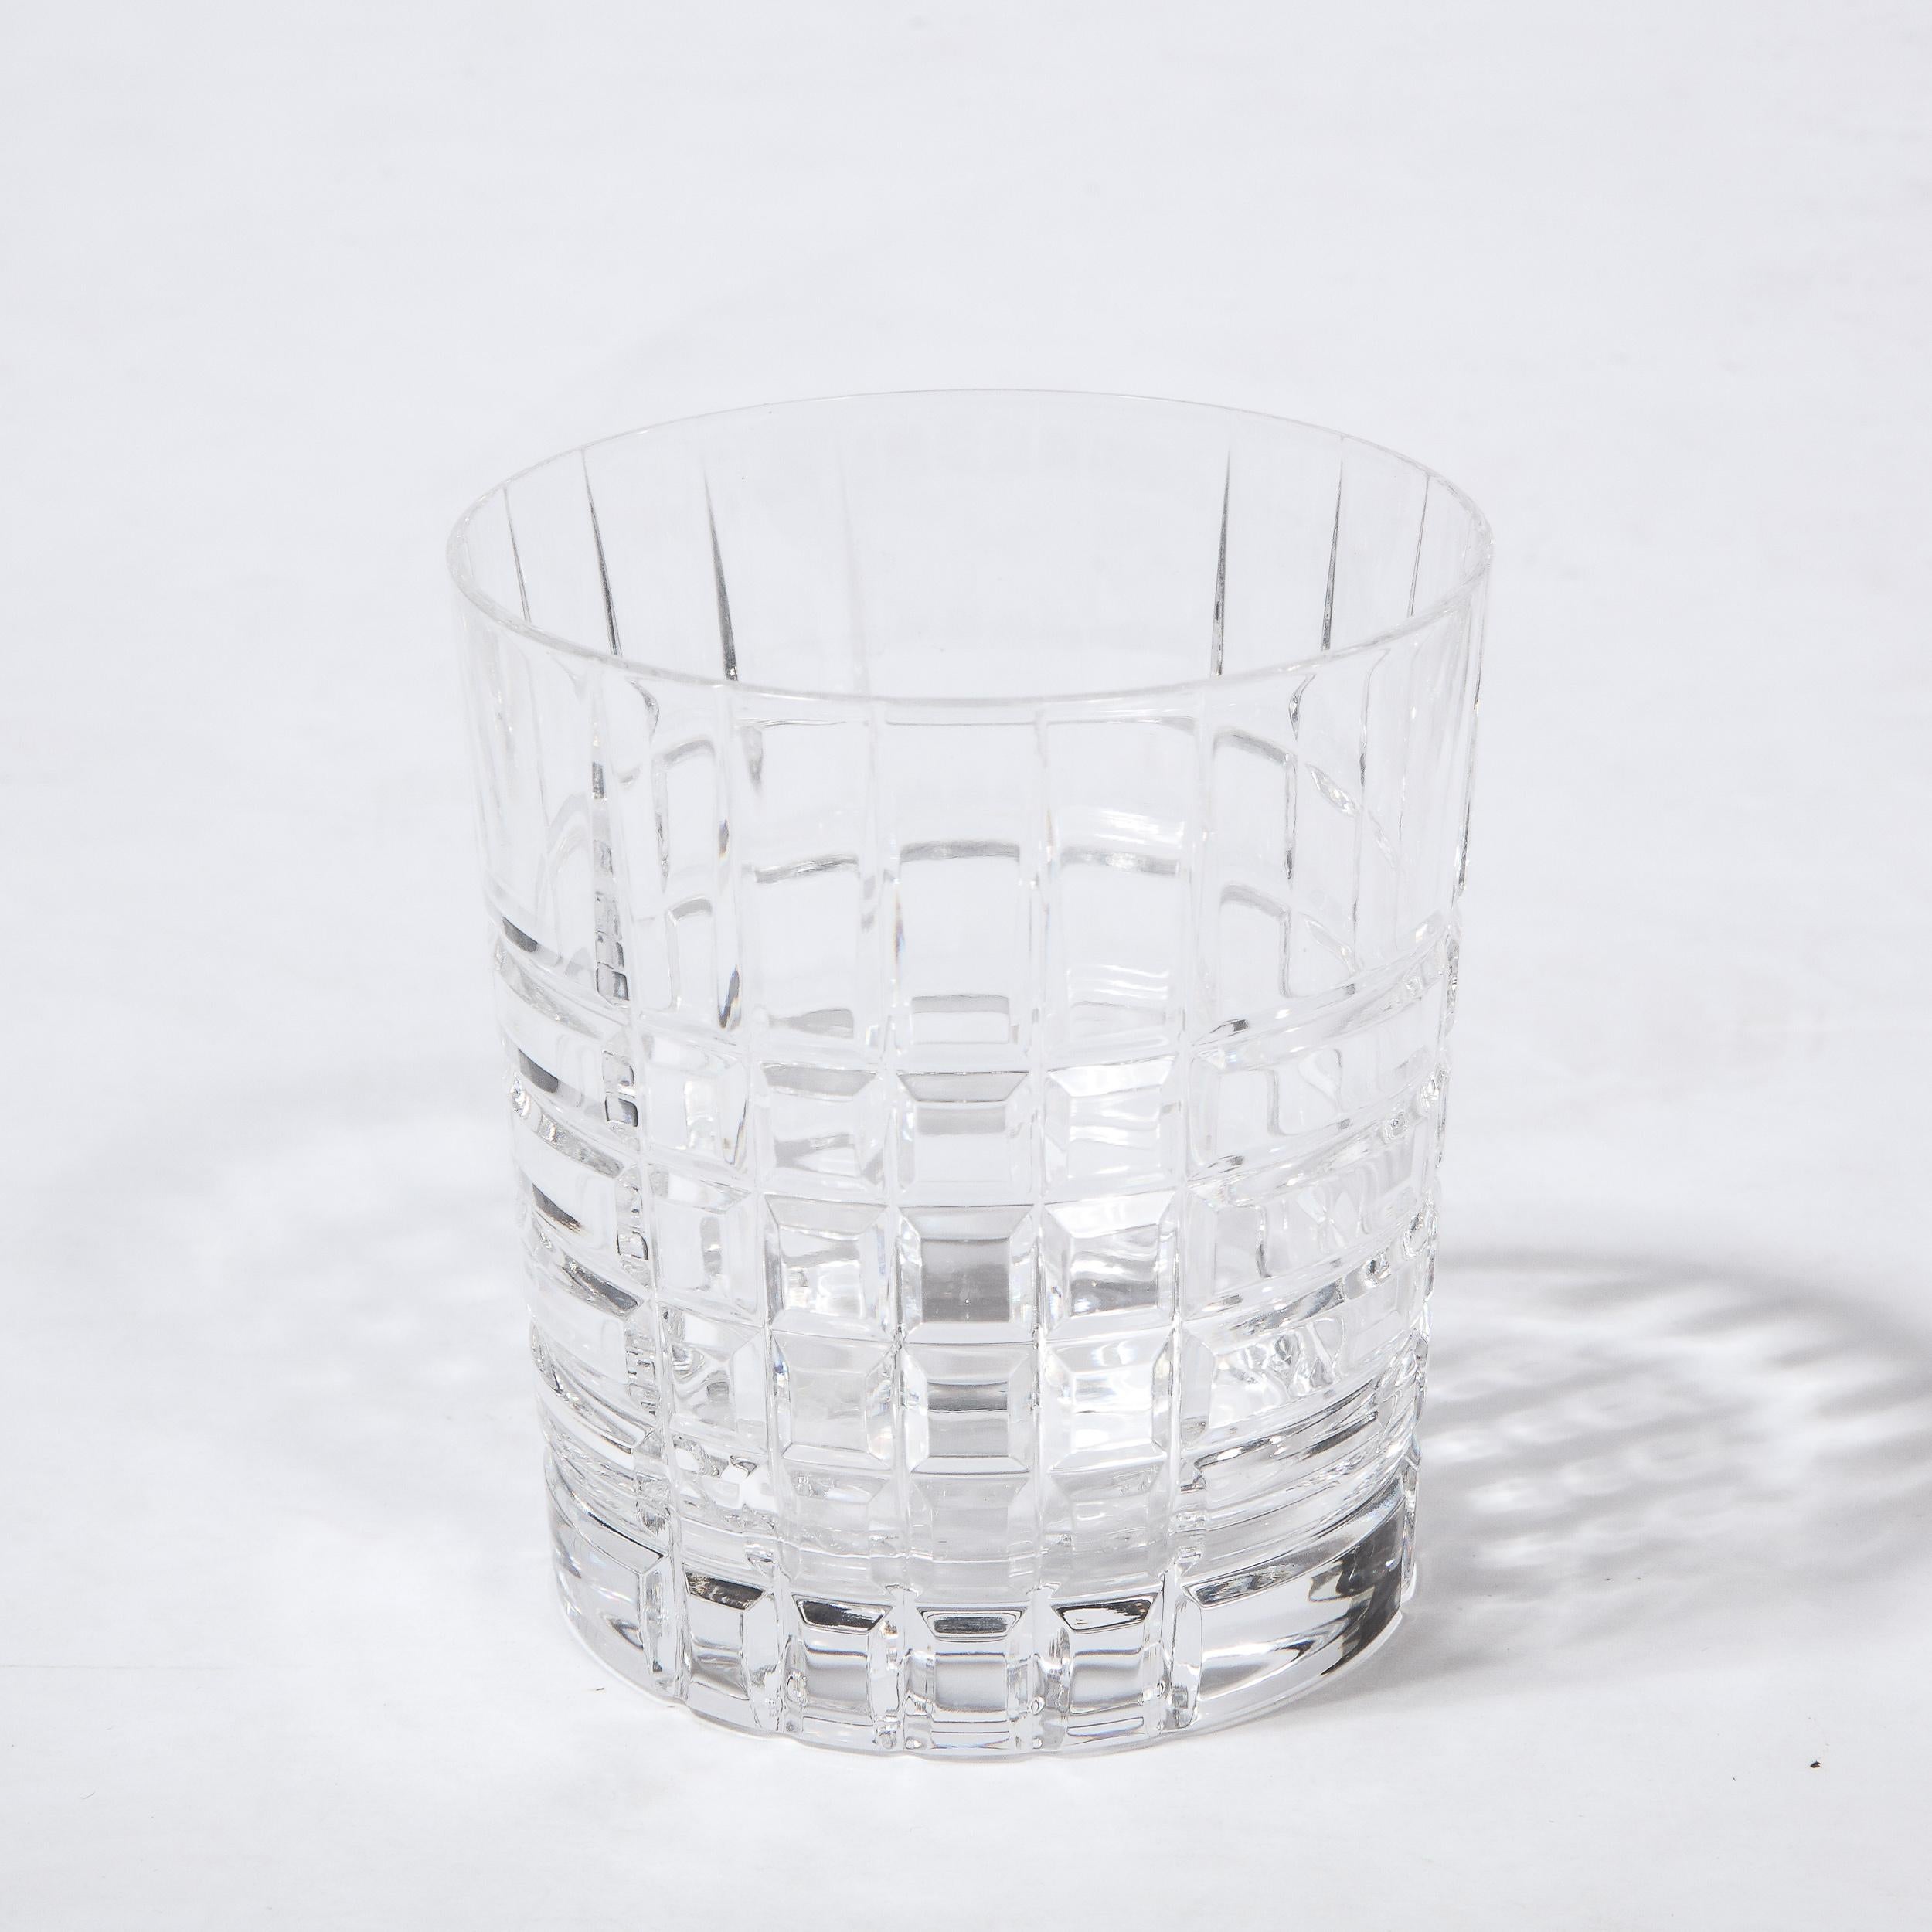 20th Century Set of 8 Modernist Square Plaid Crystal Drink Glasses/ Tumblers by Tiffany & Co.